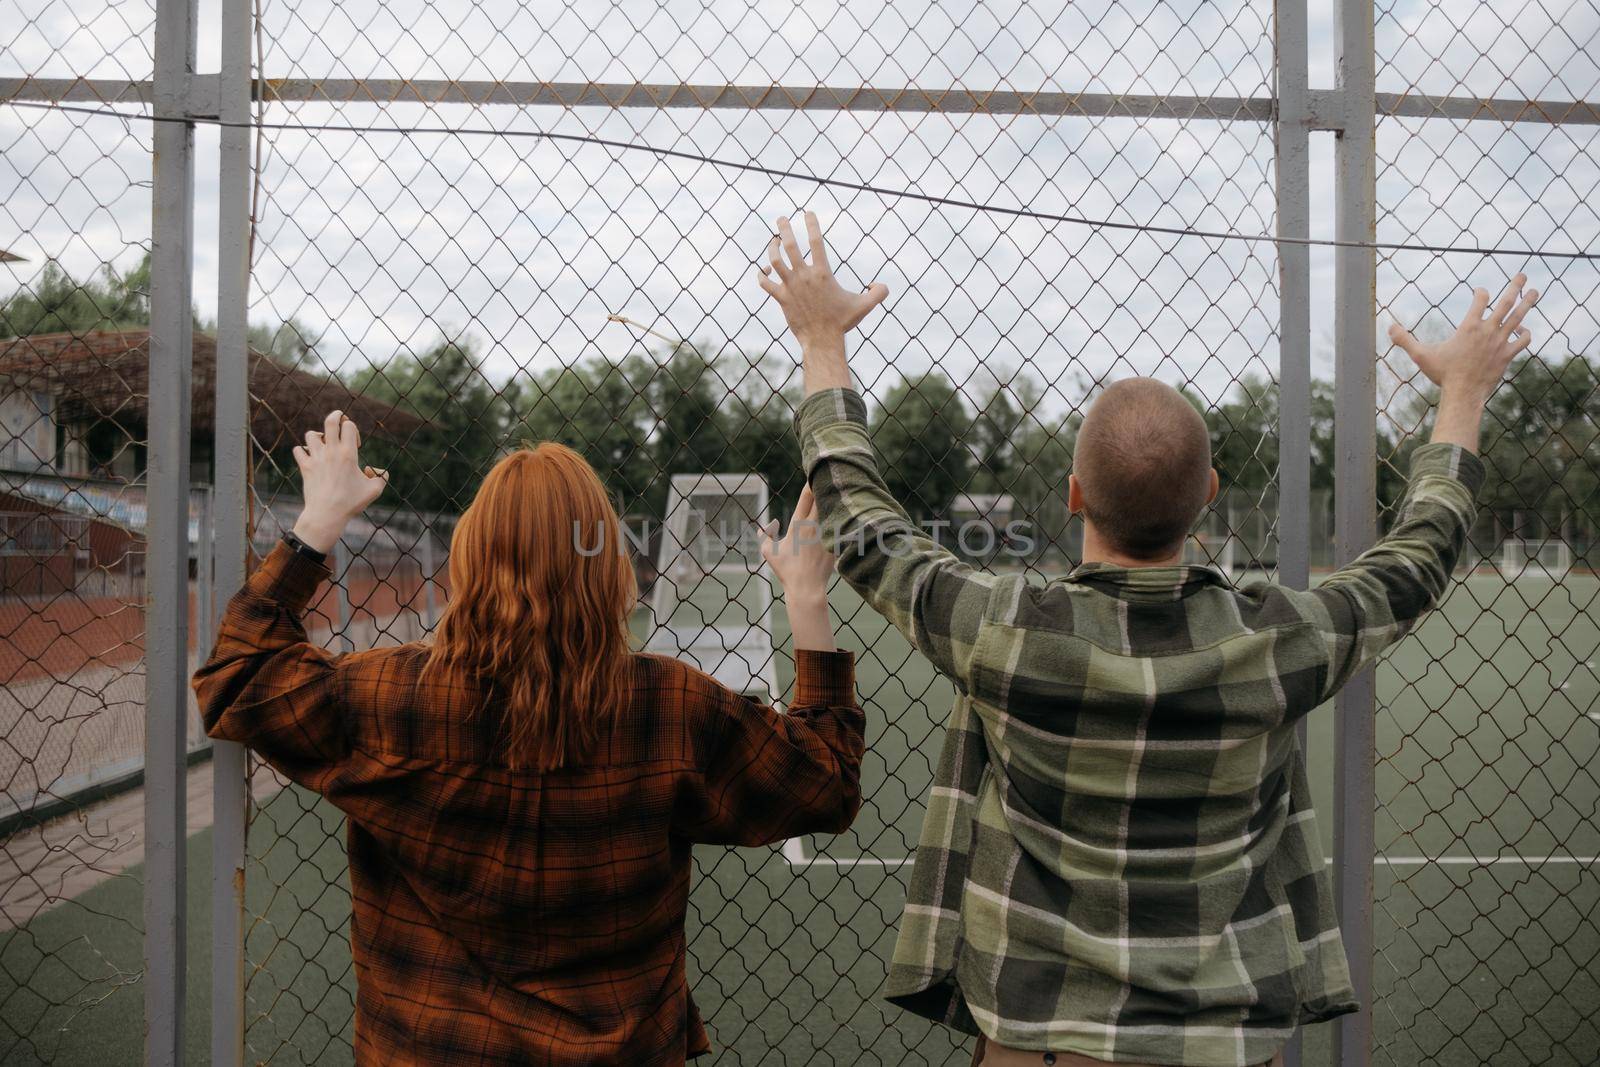 a guy in green and a girl in red stand near the fence and hold on to it with their hands